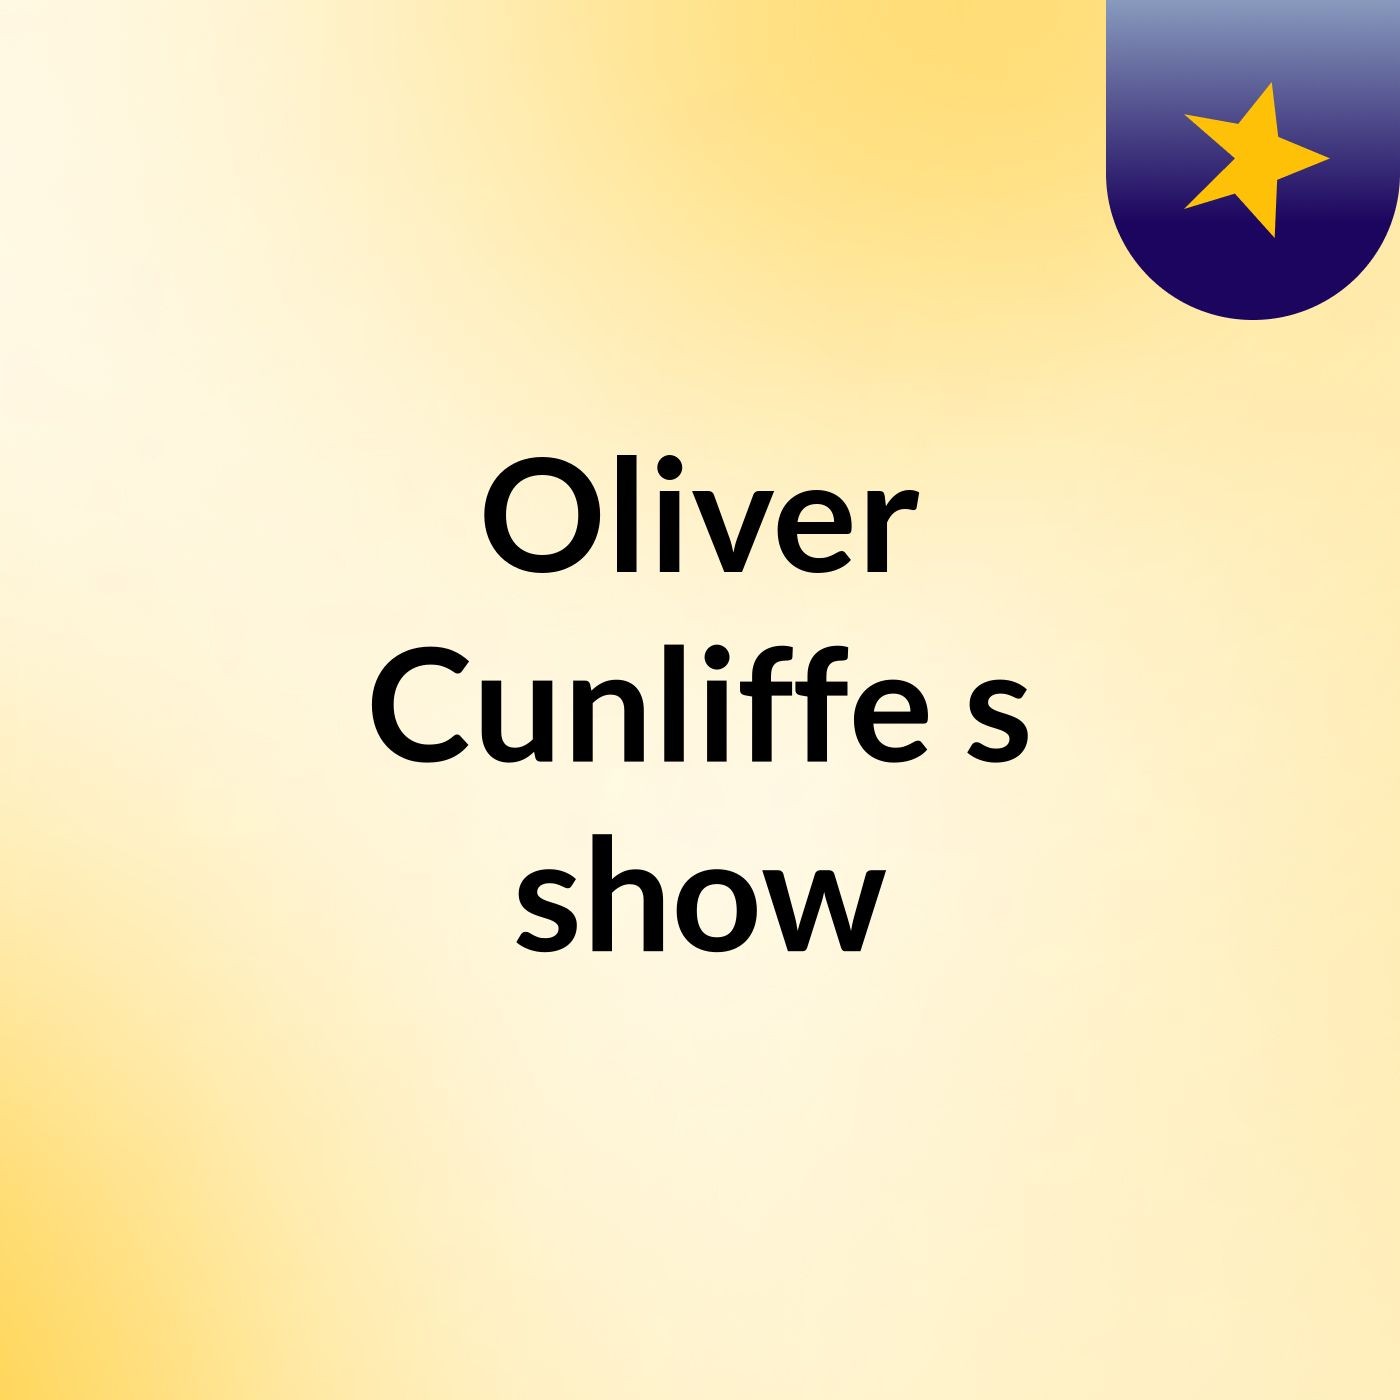 Oliver Cunliffe's show